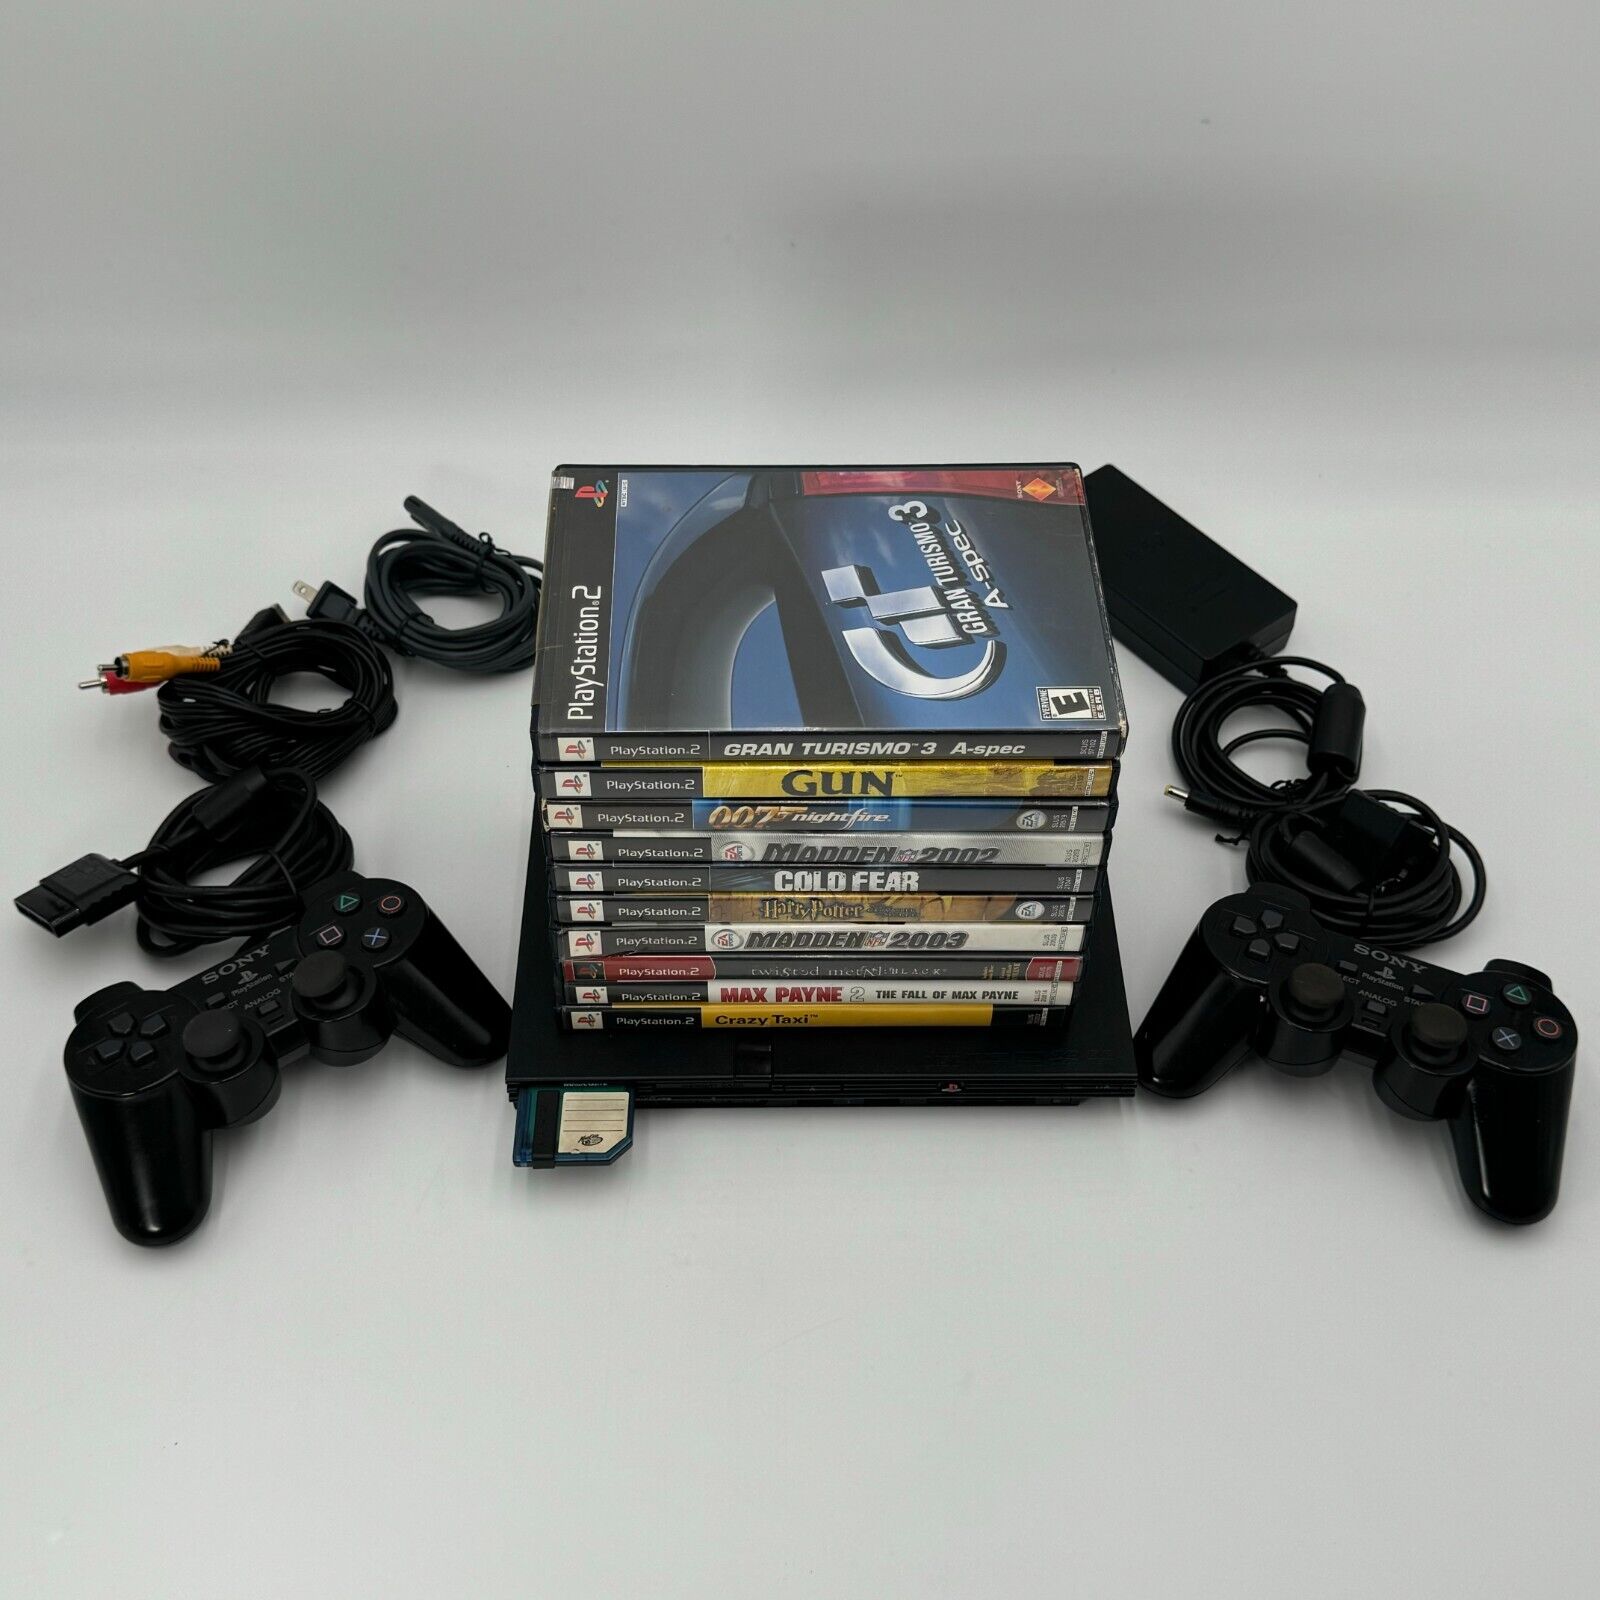 PS2 Slim Console 8mb Memory Card 10 Games 2 Dualshock Controllers Tested Works